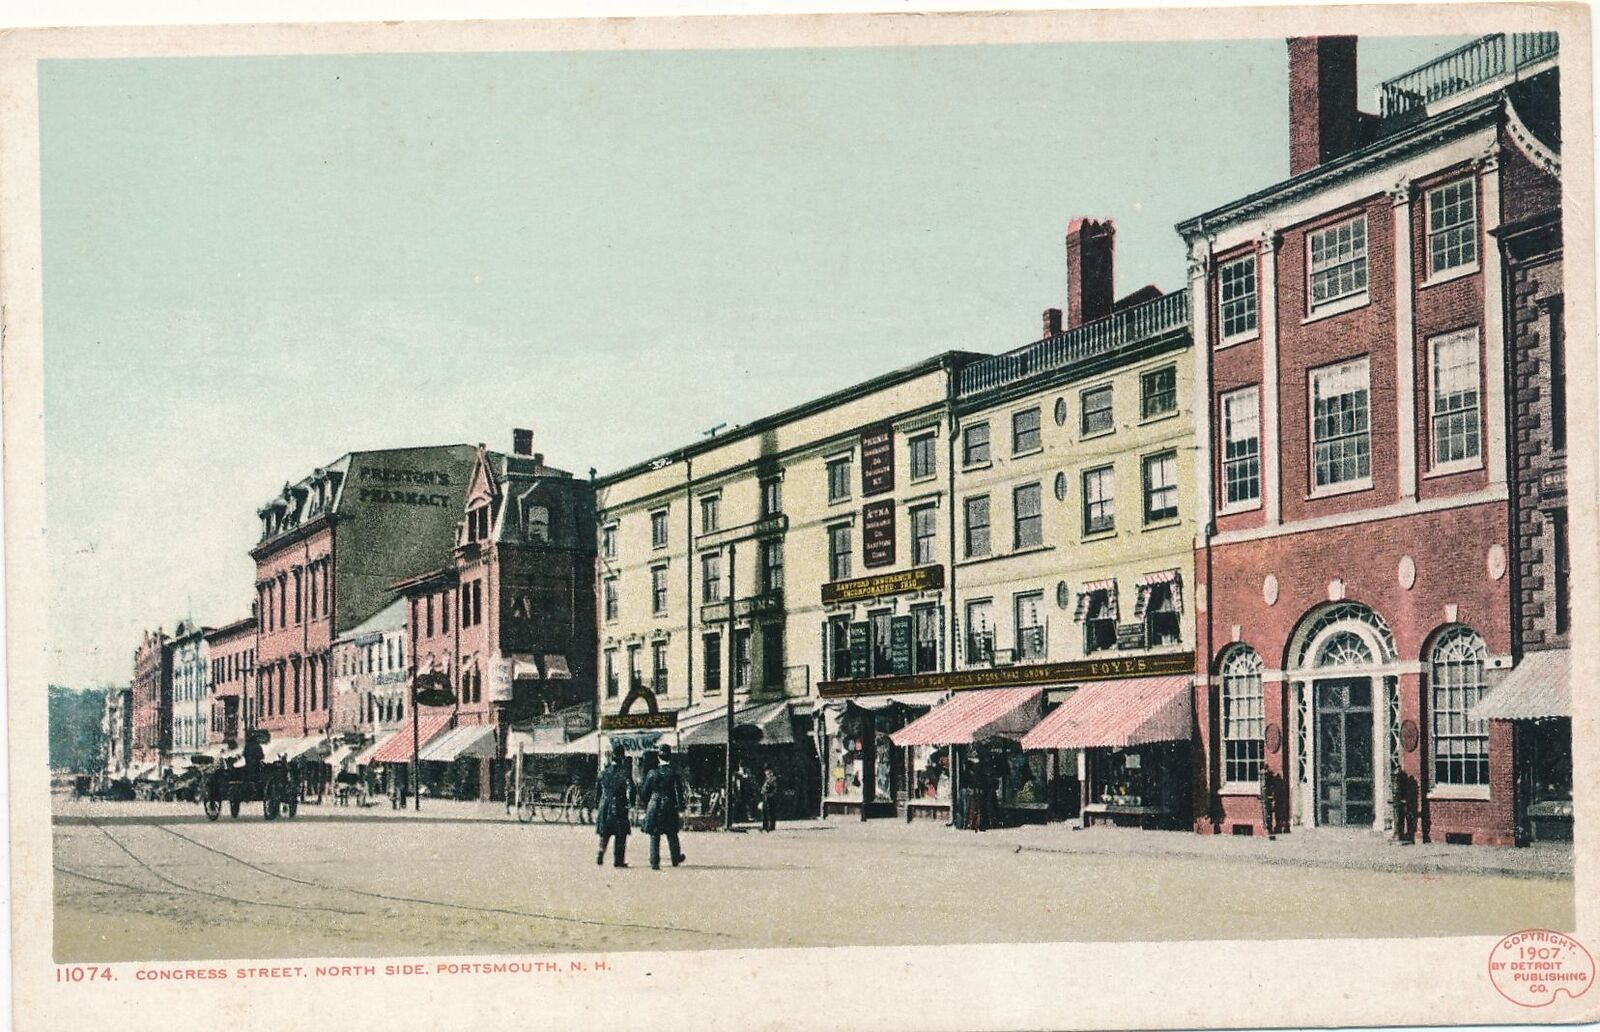 PORTSMOUTH NH - Congress Street North Side Postcard